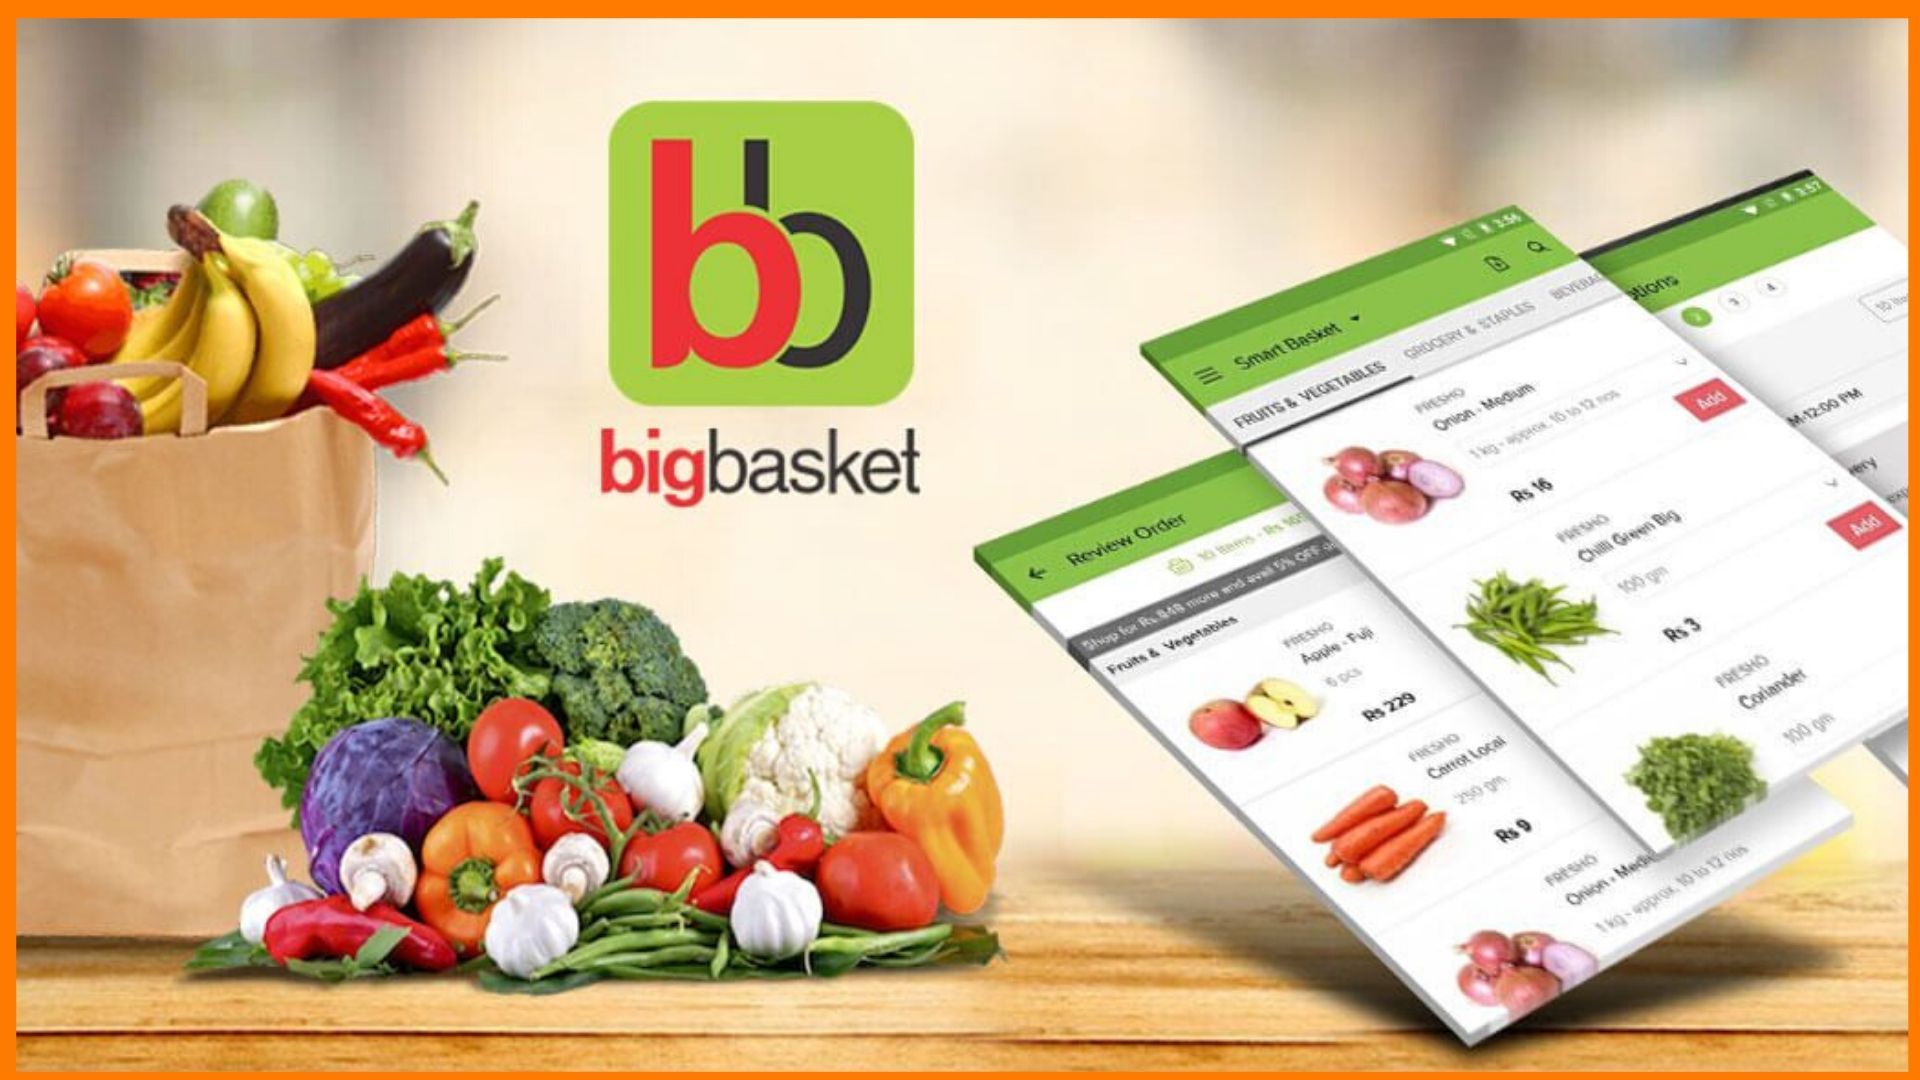 BigBasket - Success Story of India's Largest Online Grocer